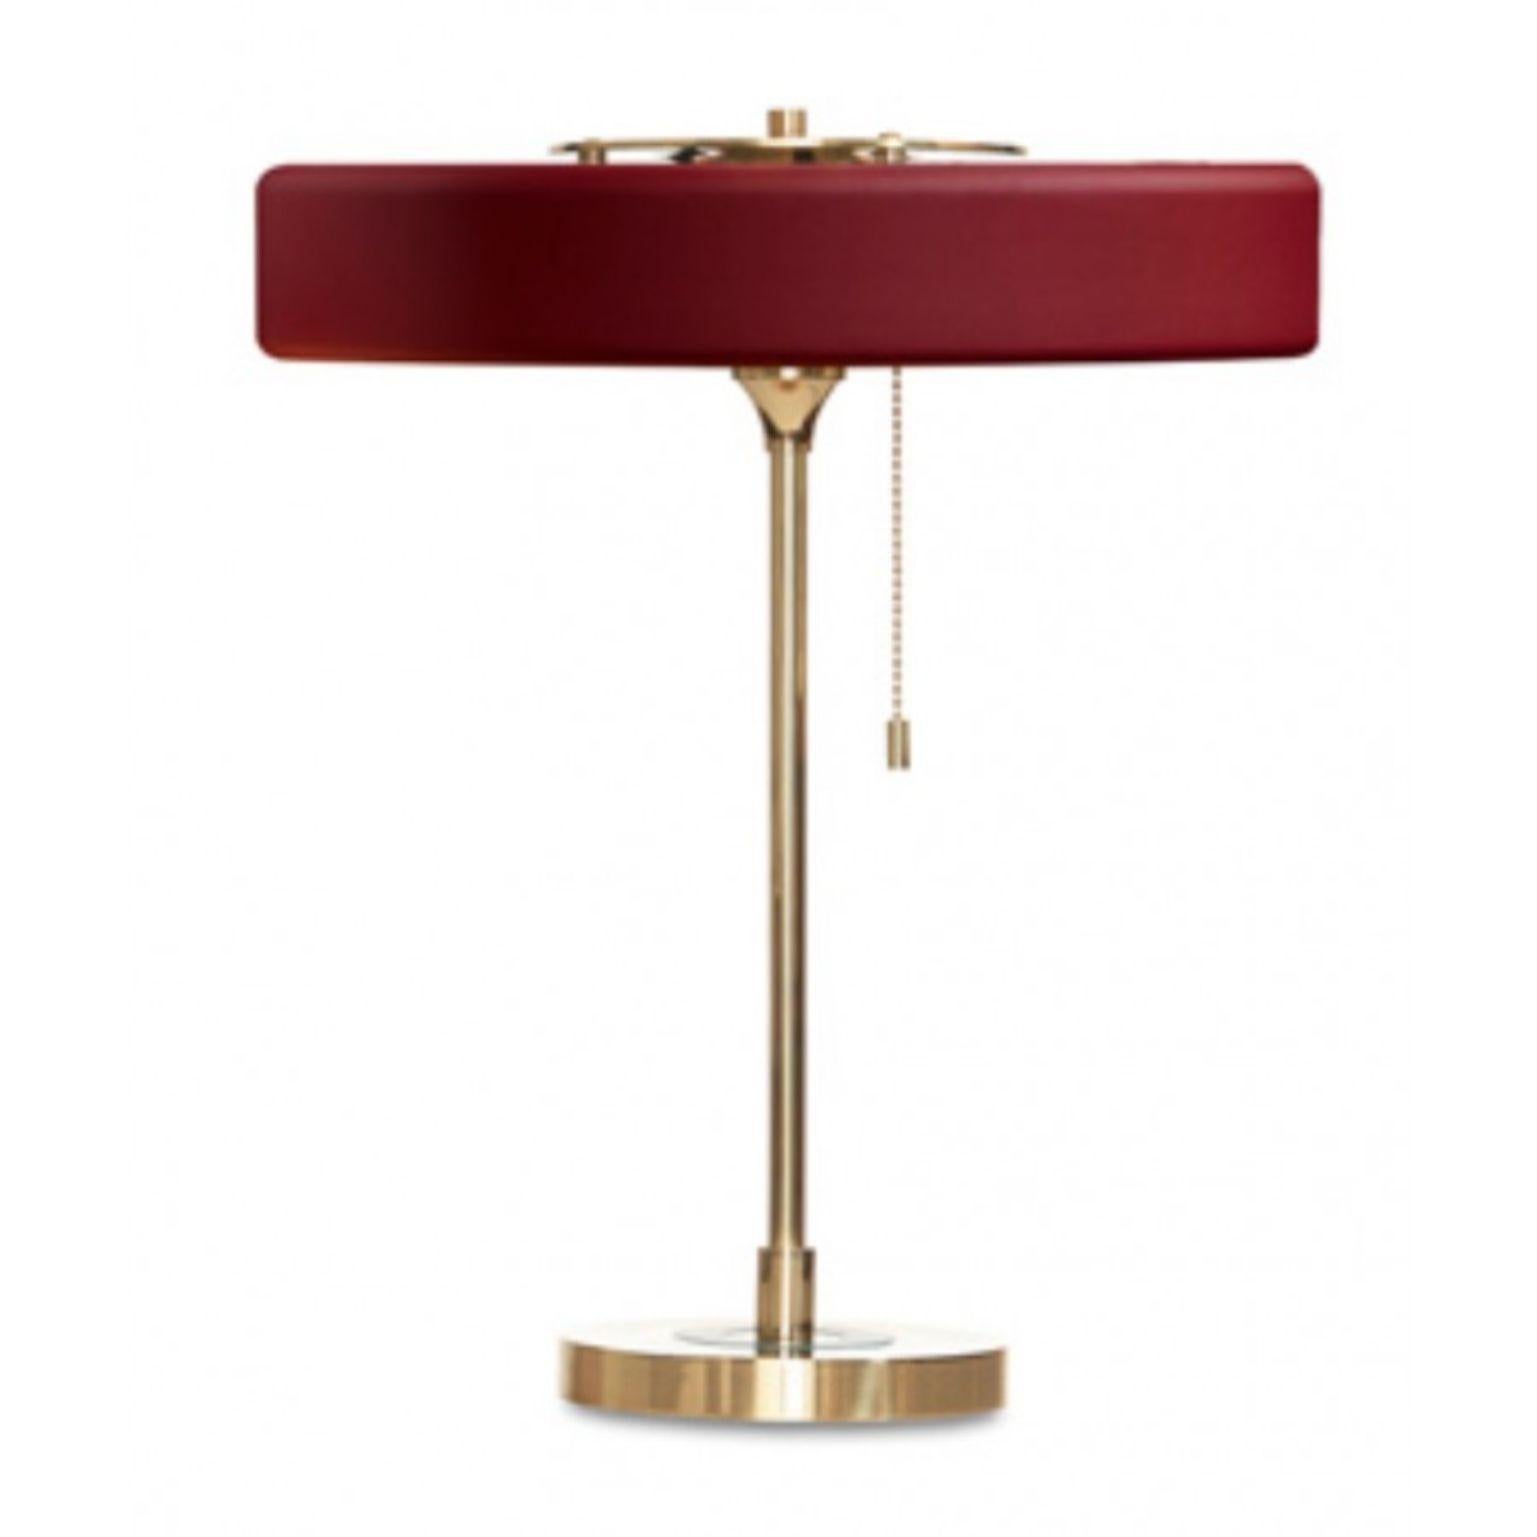 Revolve table lamp - Brushed brass - Oxblood by Bert Frank
Dimensions: 42 x 35 x 15 cm
Materials: Brass, steel

Also available in polished brass

When Adam Yeats and Robbie Llewellyn founded Bert Frank in 2013 it was a meeting of minds and the start